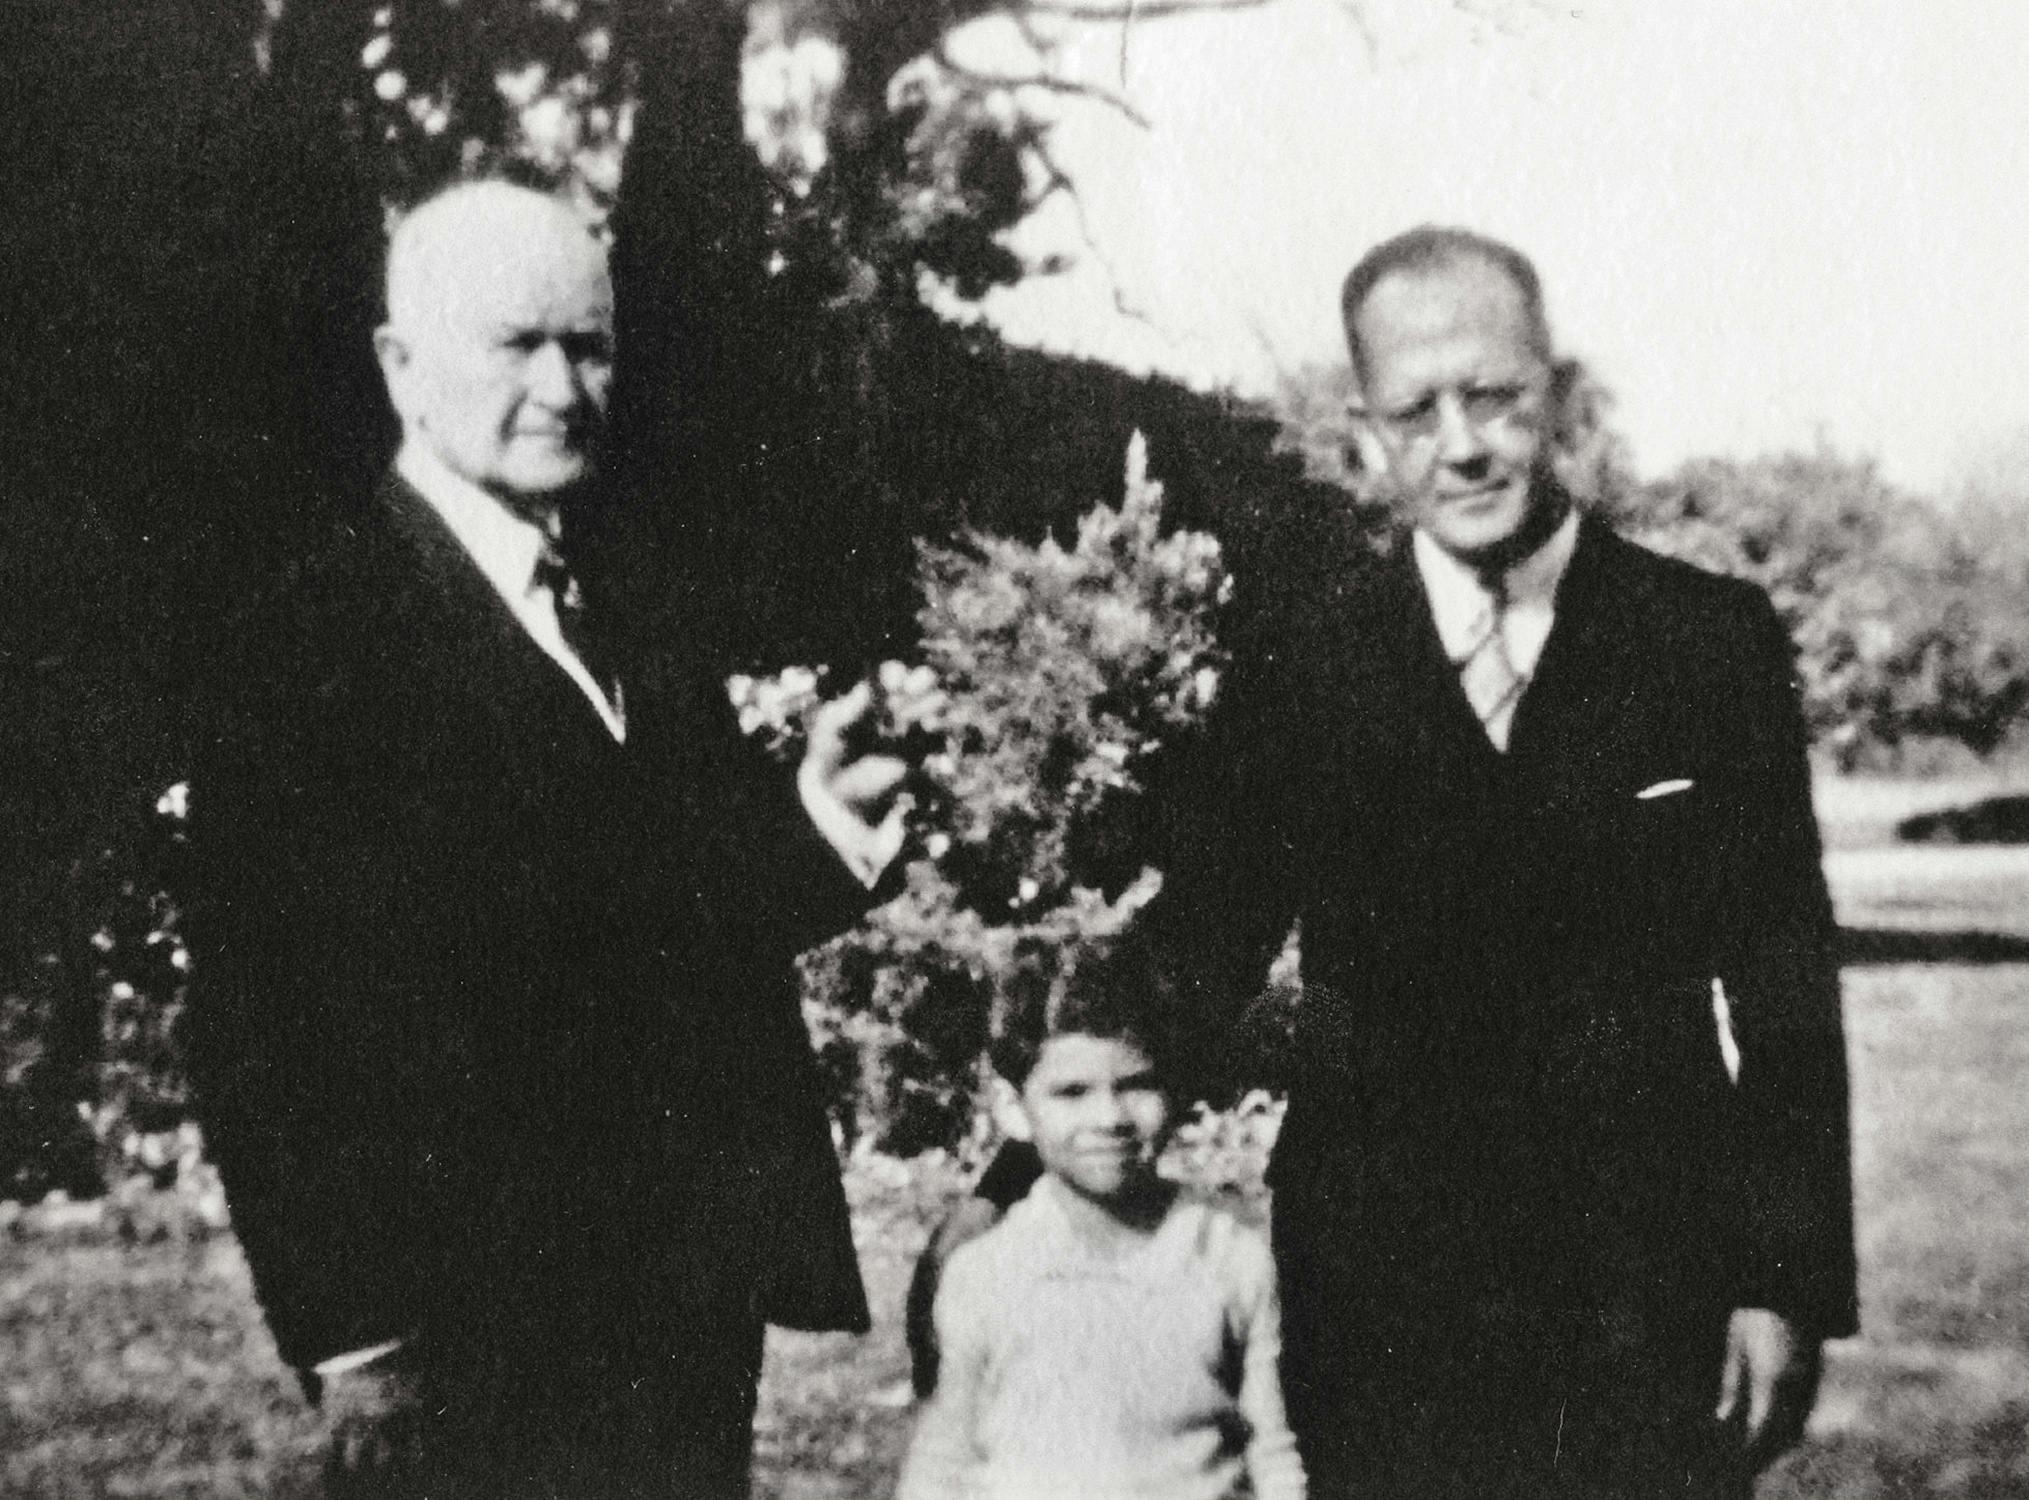 James Baker with his father and grandfather